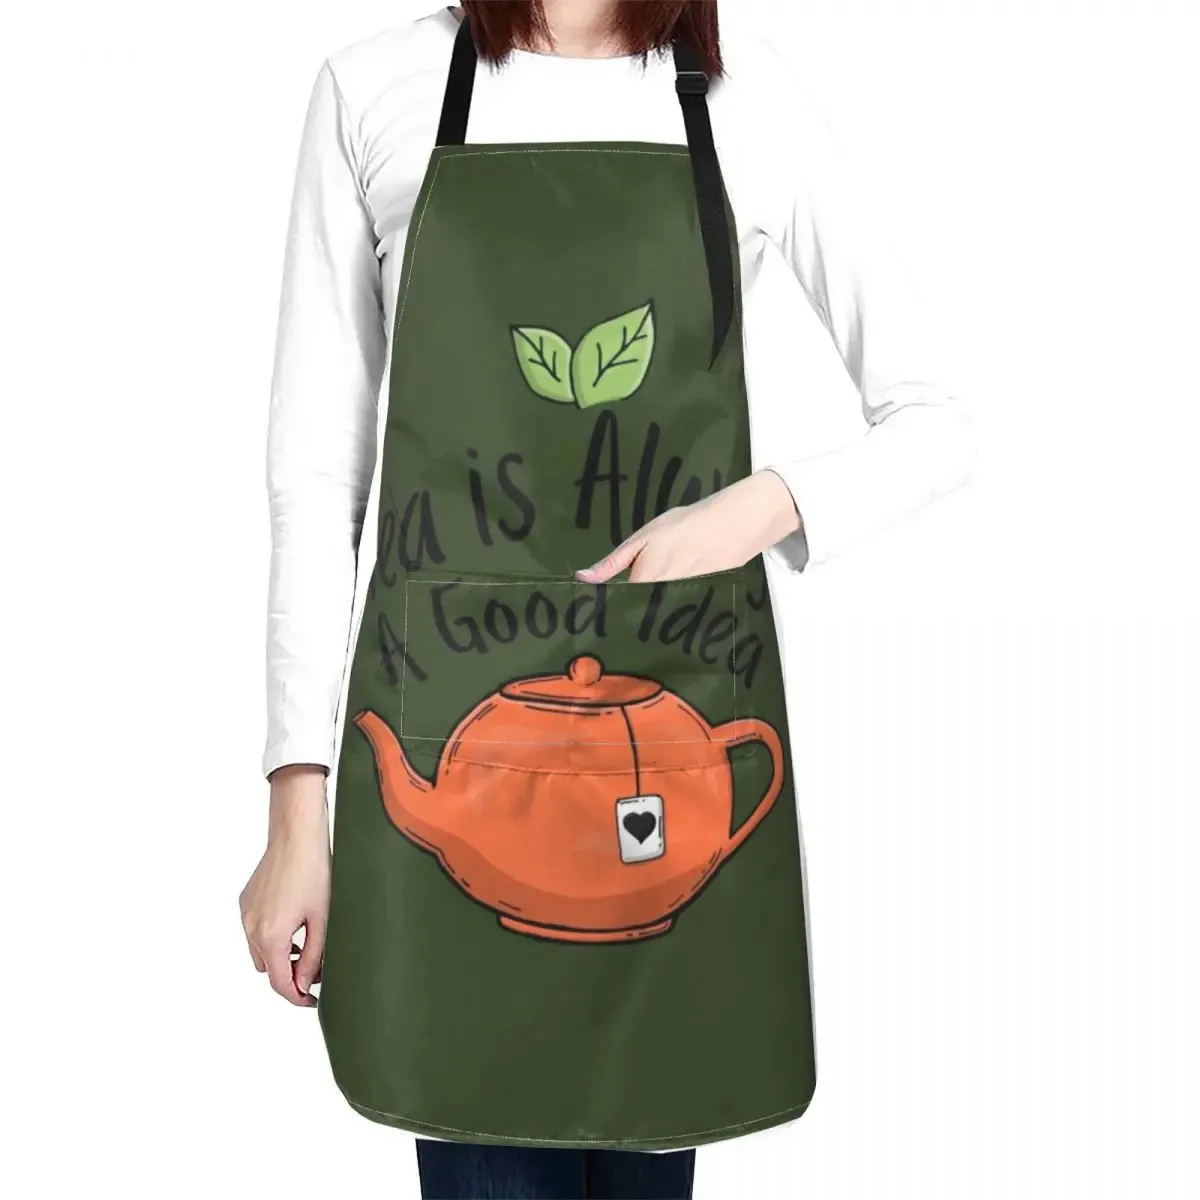 Aprons Tea is a good idea Apron Kitchen Things And For Home cleaning aprons kitchen apron girl women's 231019